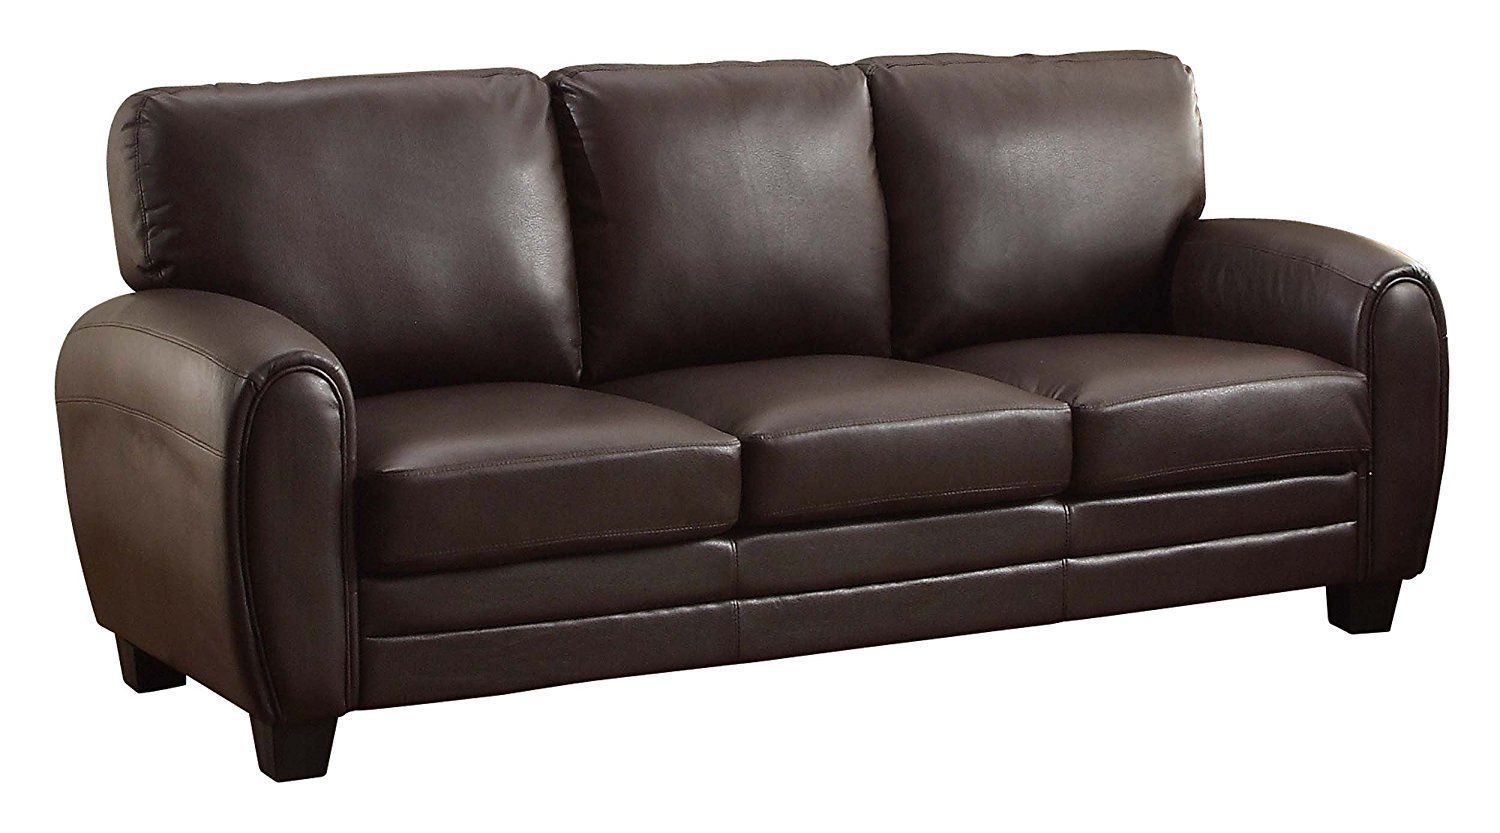 Brown Faux Leather Couch – Home Furniture Design With Regard To Faux Leather Sofas In Chocolate Brown (Gallery 19 of 20)